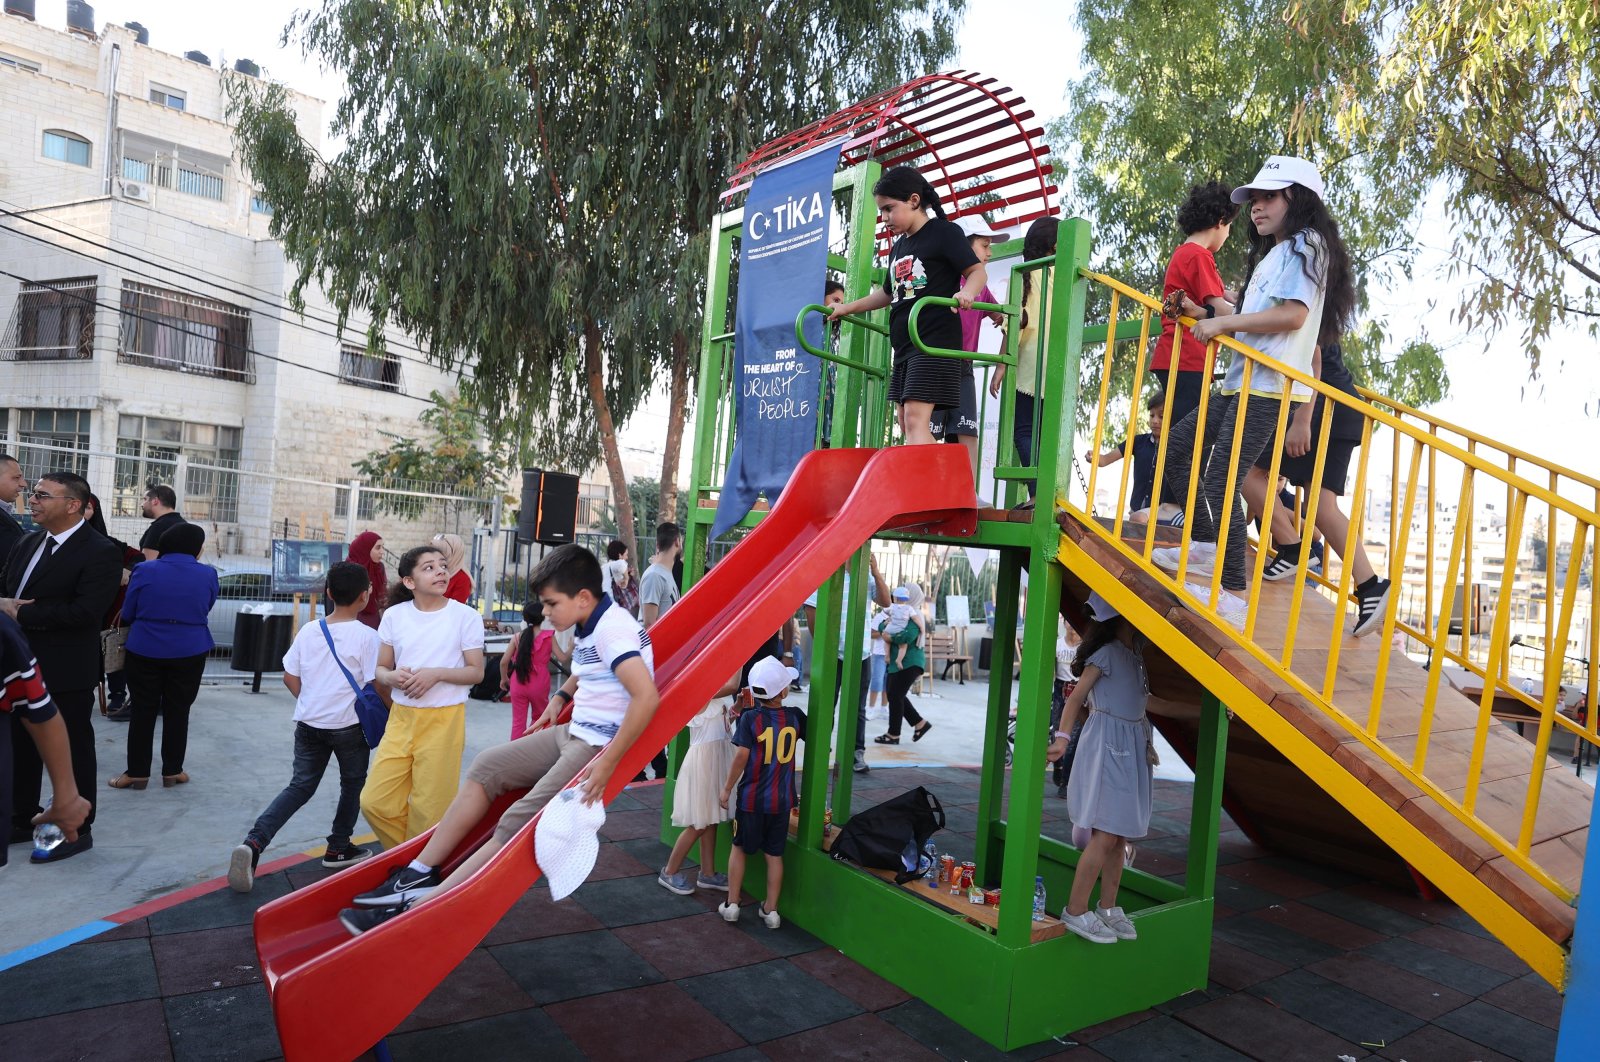 Kids play in the July 15 Memorial Park, established by the Turkish Cooperation and Coordination Agency (TIKA), in the occupied West Bank, Palestine, July 15, 2023. (AA Photo)